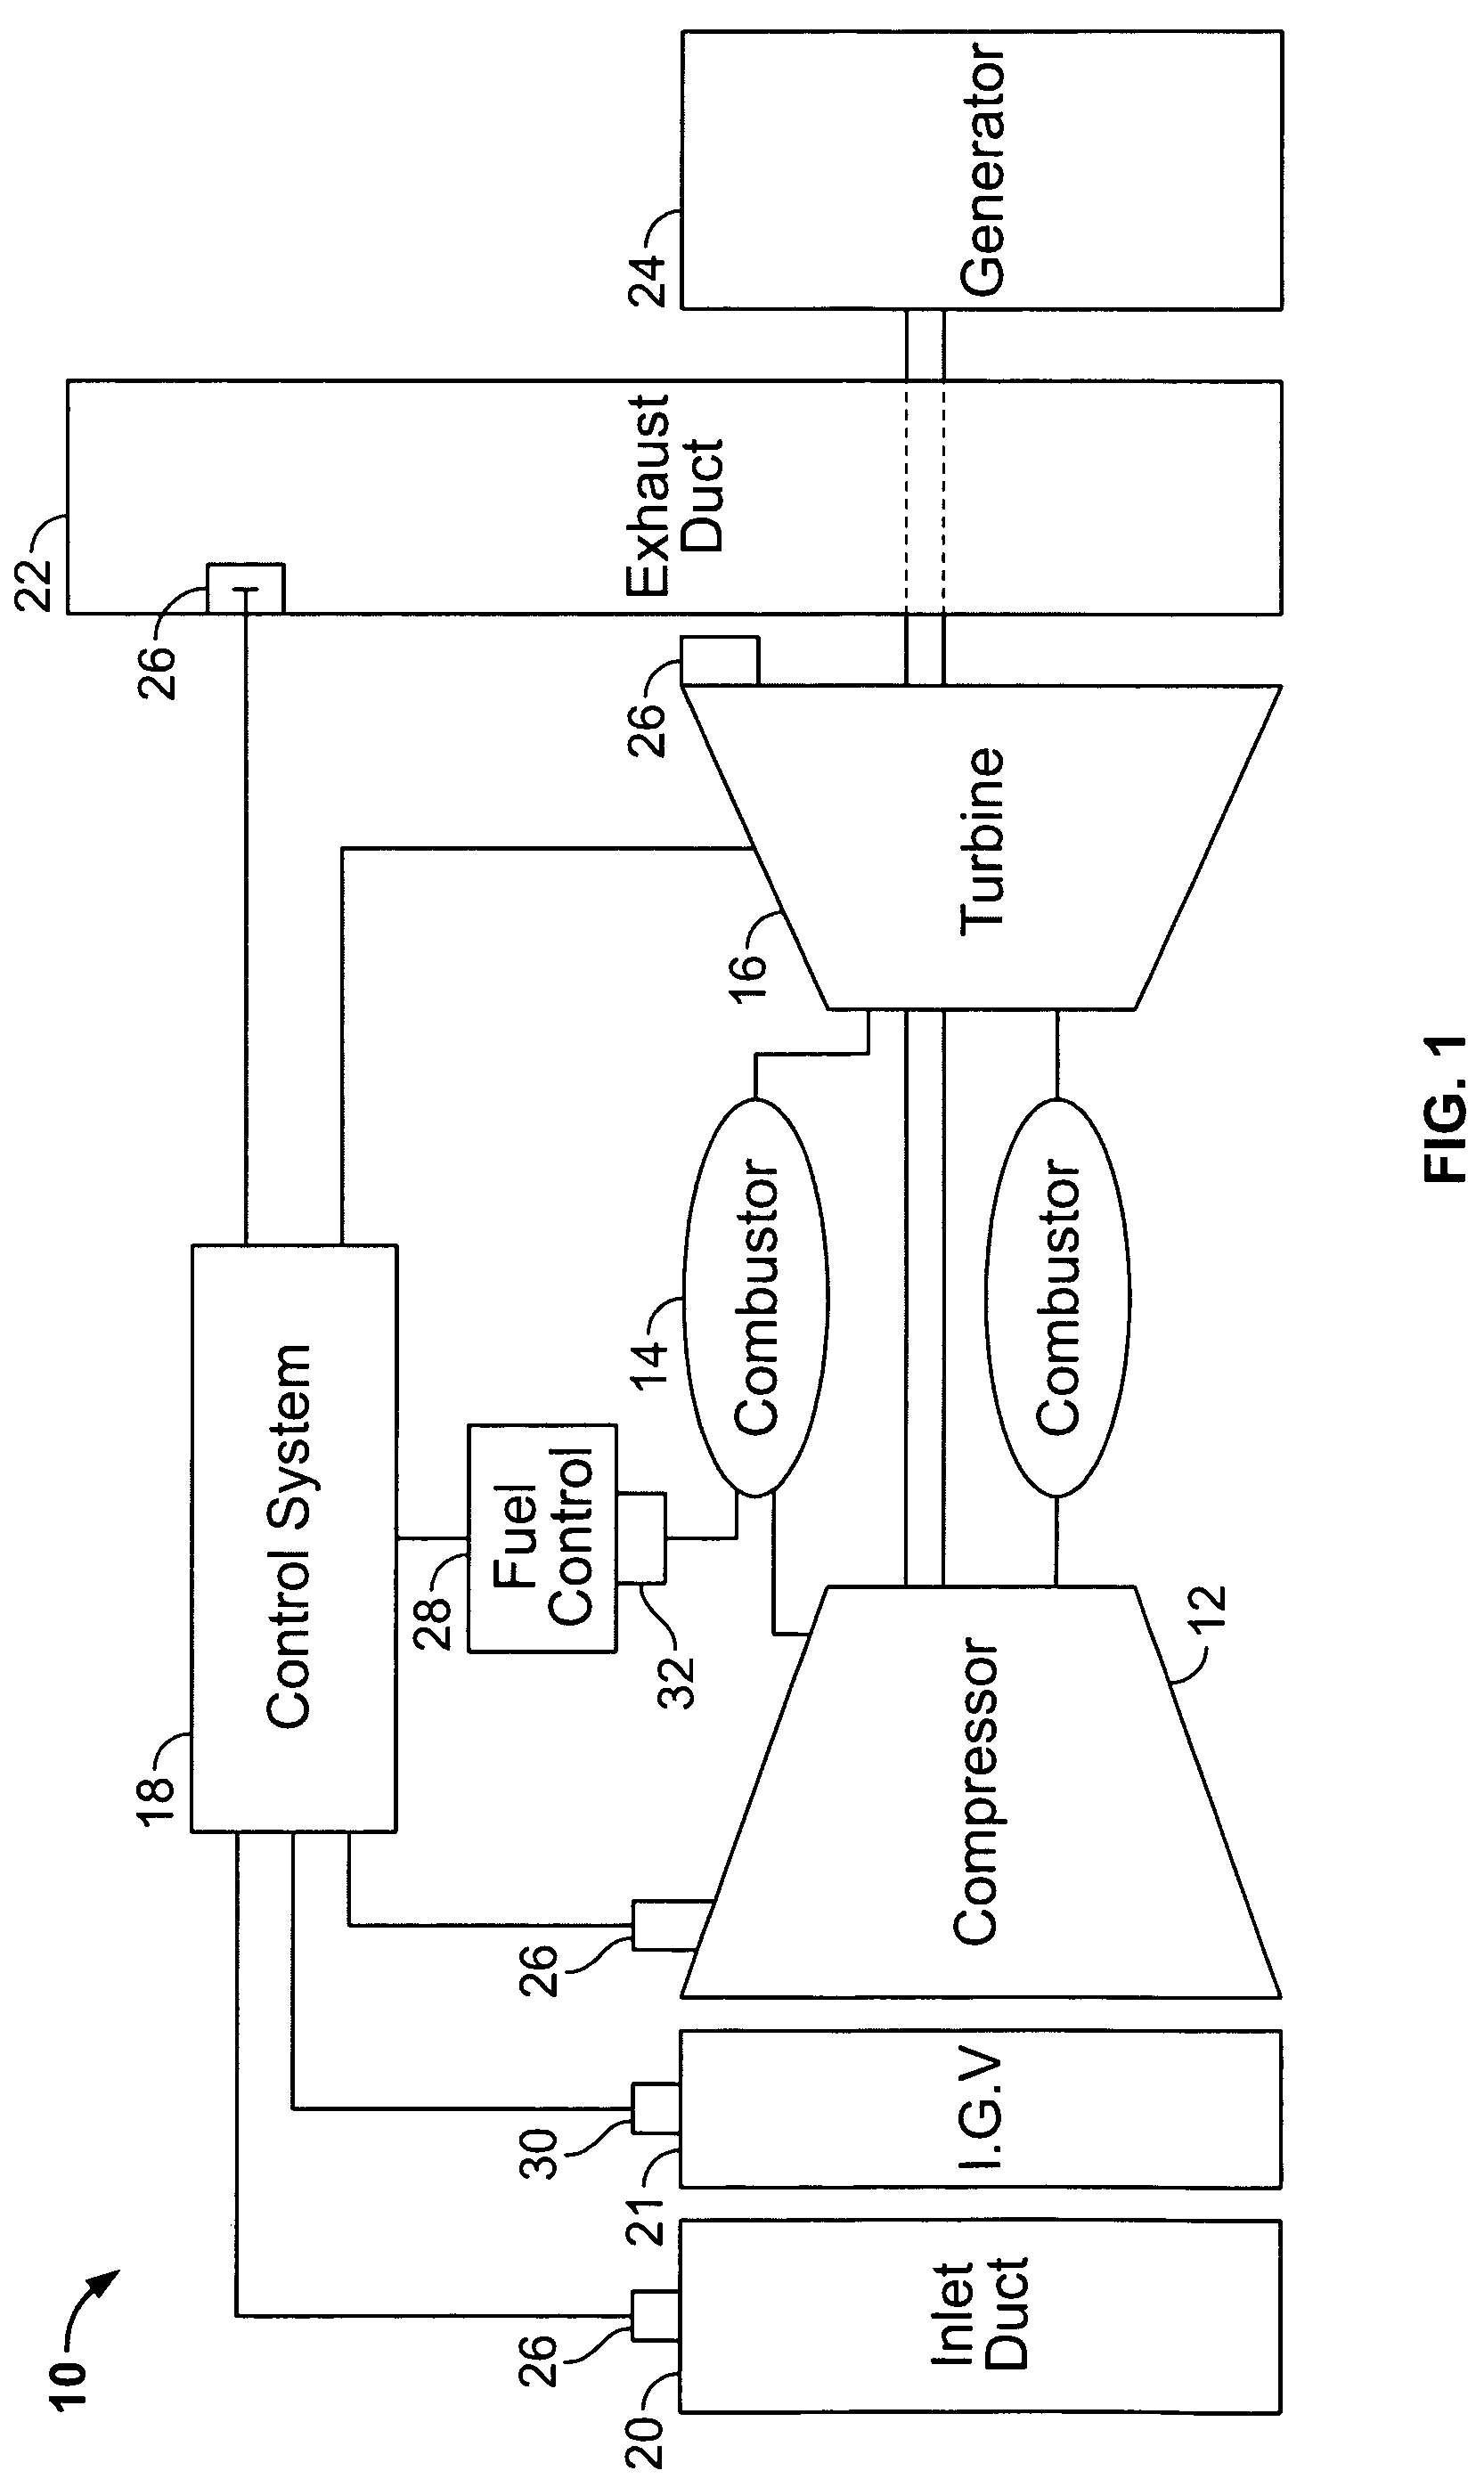 Method for operating gas turbine engine systems